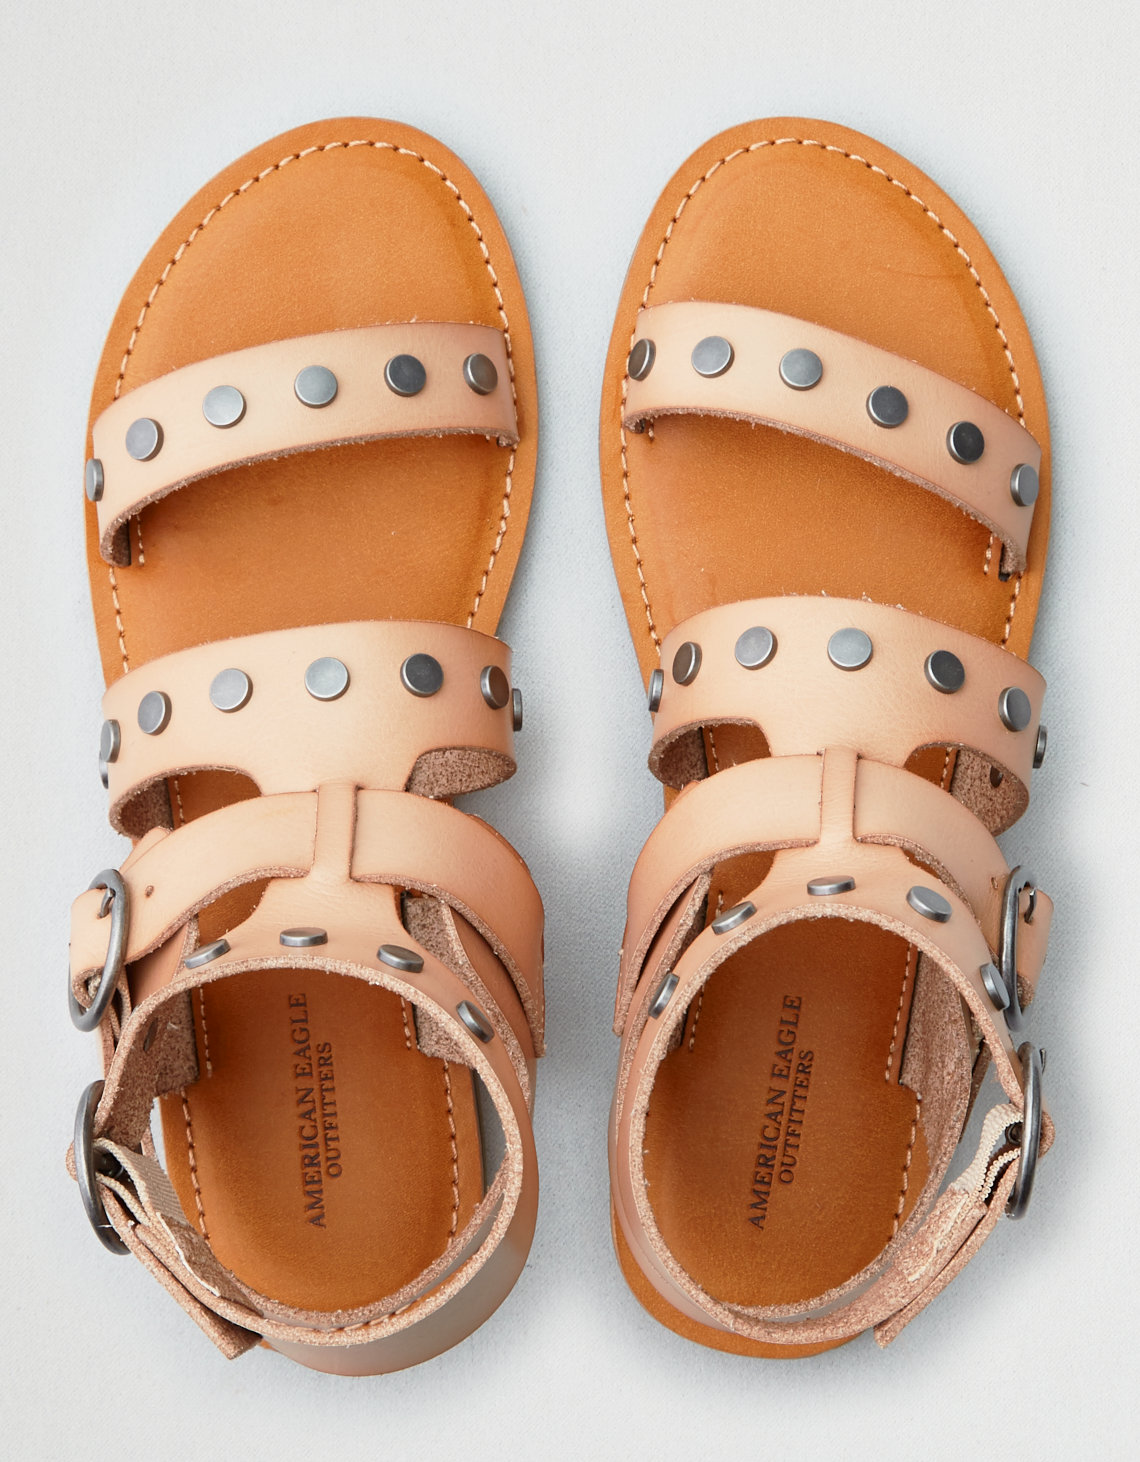 Cute Women's Sandals - 2018 Trending Spring/Summer Sandals -- Mommy Fashion Blogger - The Overwhelmed Mommy